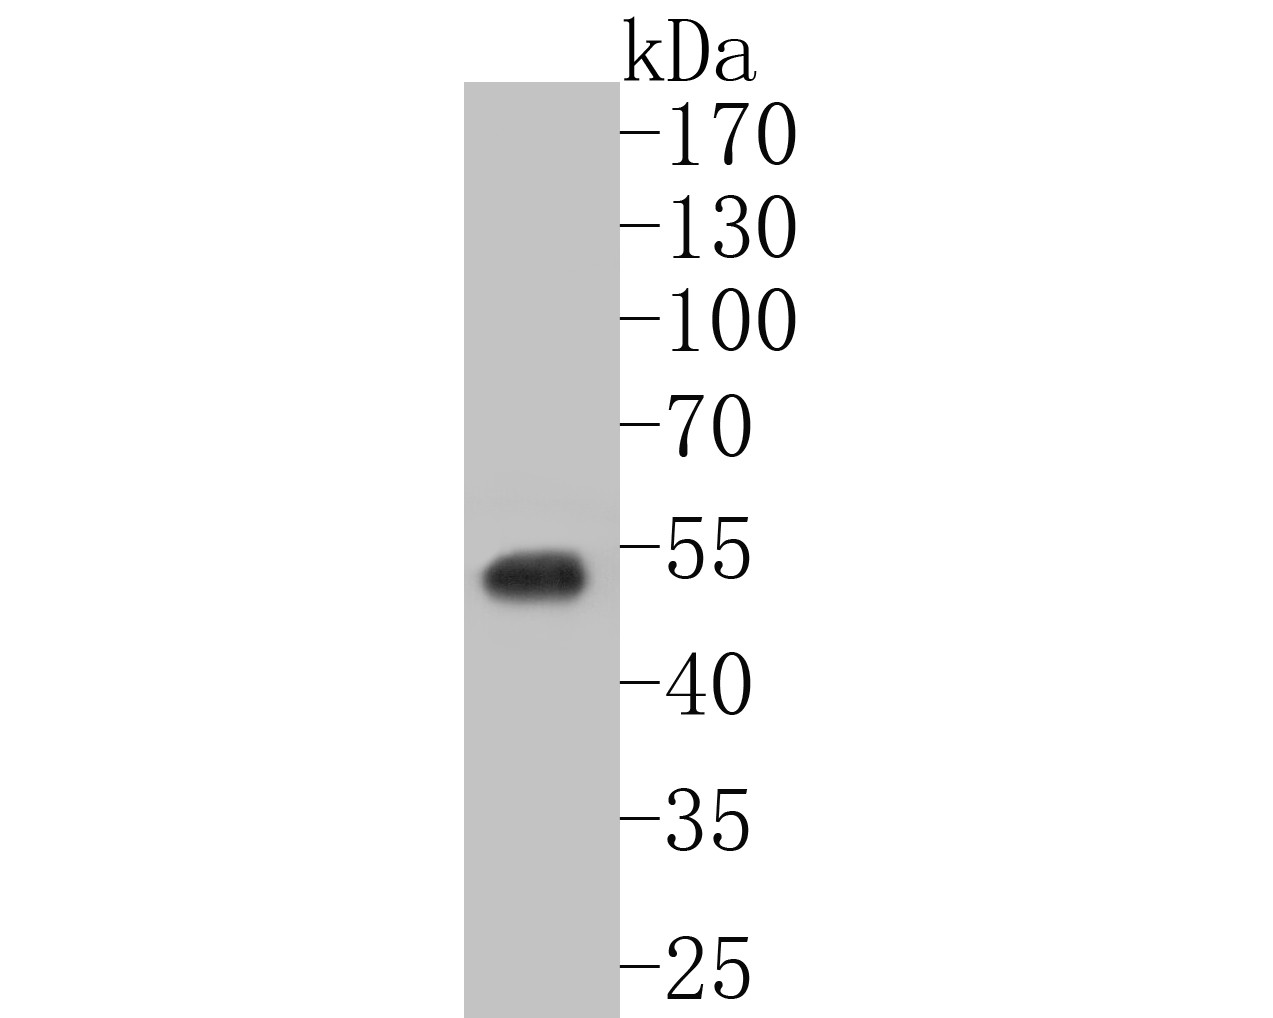 Western blot analysis of GABRD on HT-29 cell lysates. Proteins were transferred to a PVDF membrane and blocked with 5% BSA in PBS for 1 hour at room temperature. The primary antibody (ER1901-54, 1/2,000) was used in 5% BSA at room temperature for 2 hours. Goat Anti-Rabbit IgG - HRP Secondary Antibody (HA1001) at 1:5,000 dilution was used for 1 hour at room temperature.